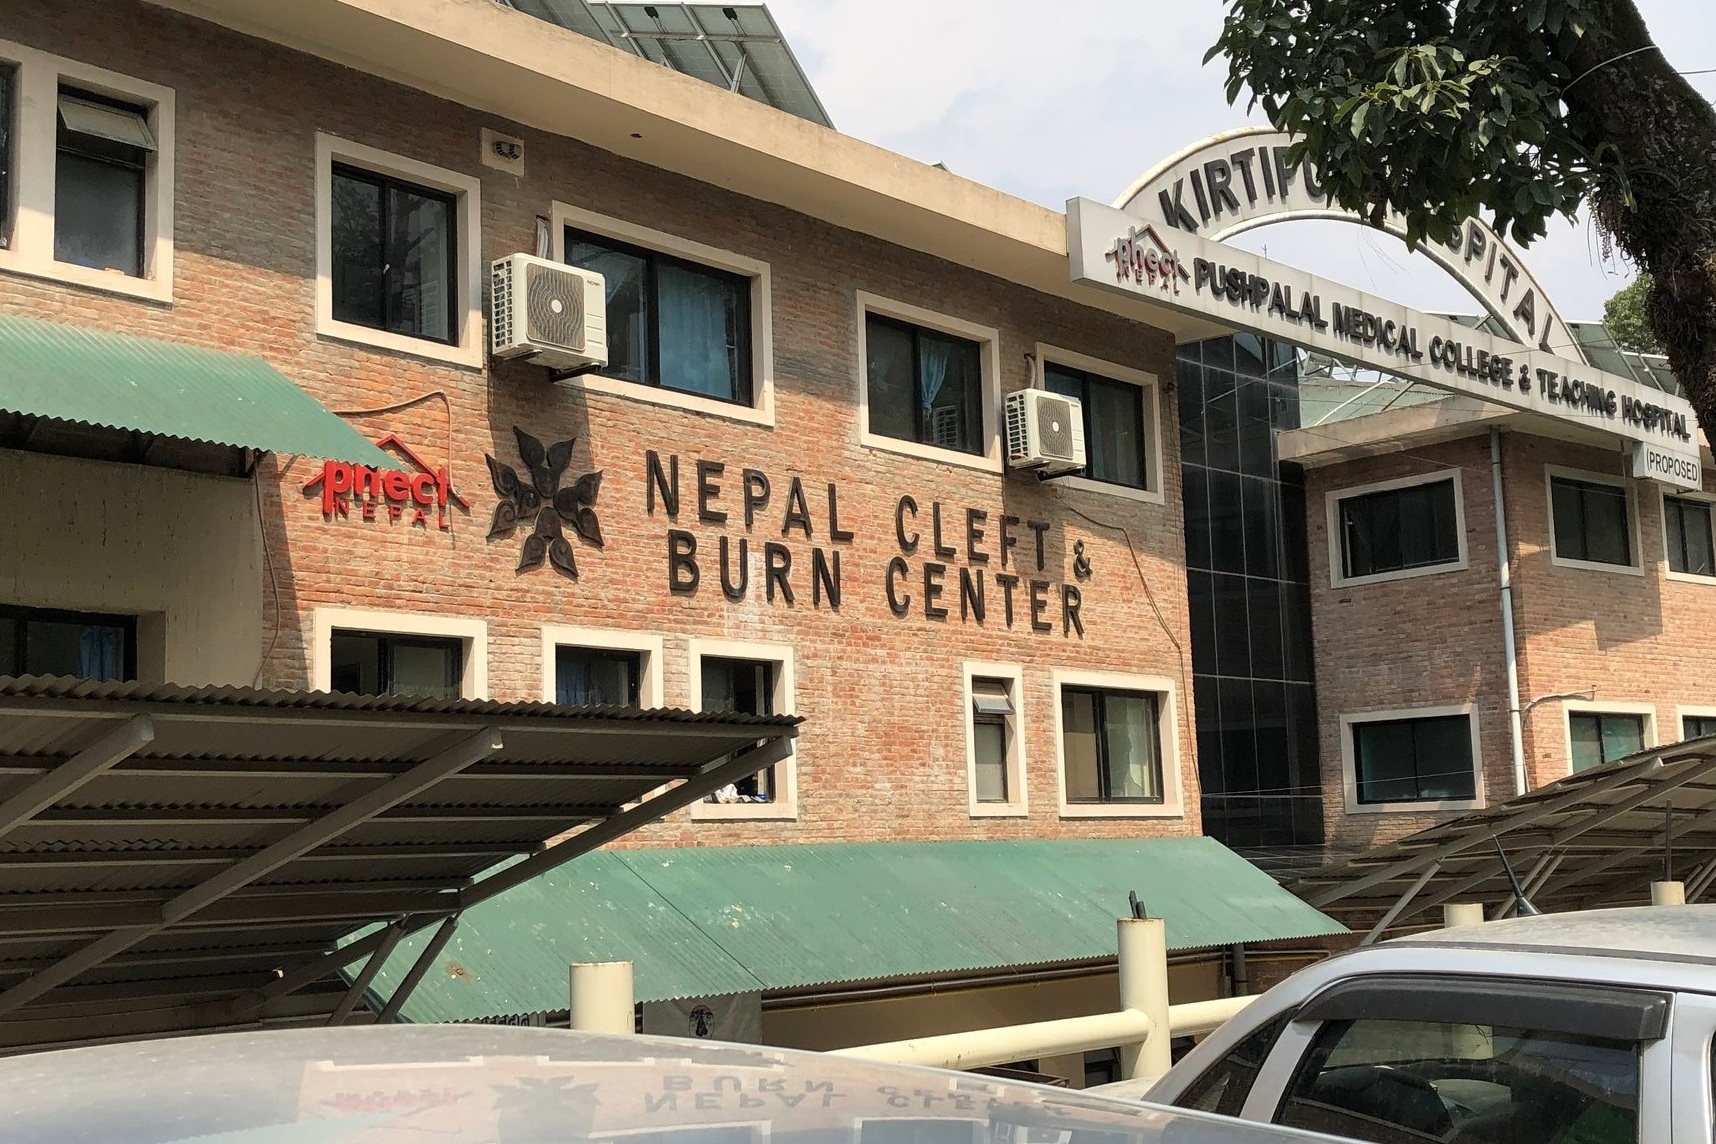  Nepal Cleft and Burn Center 